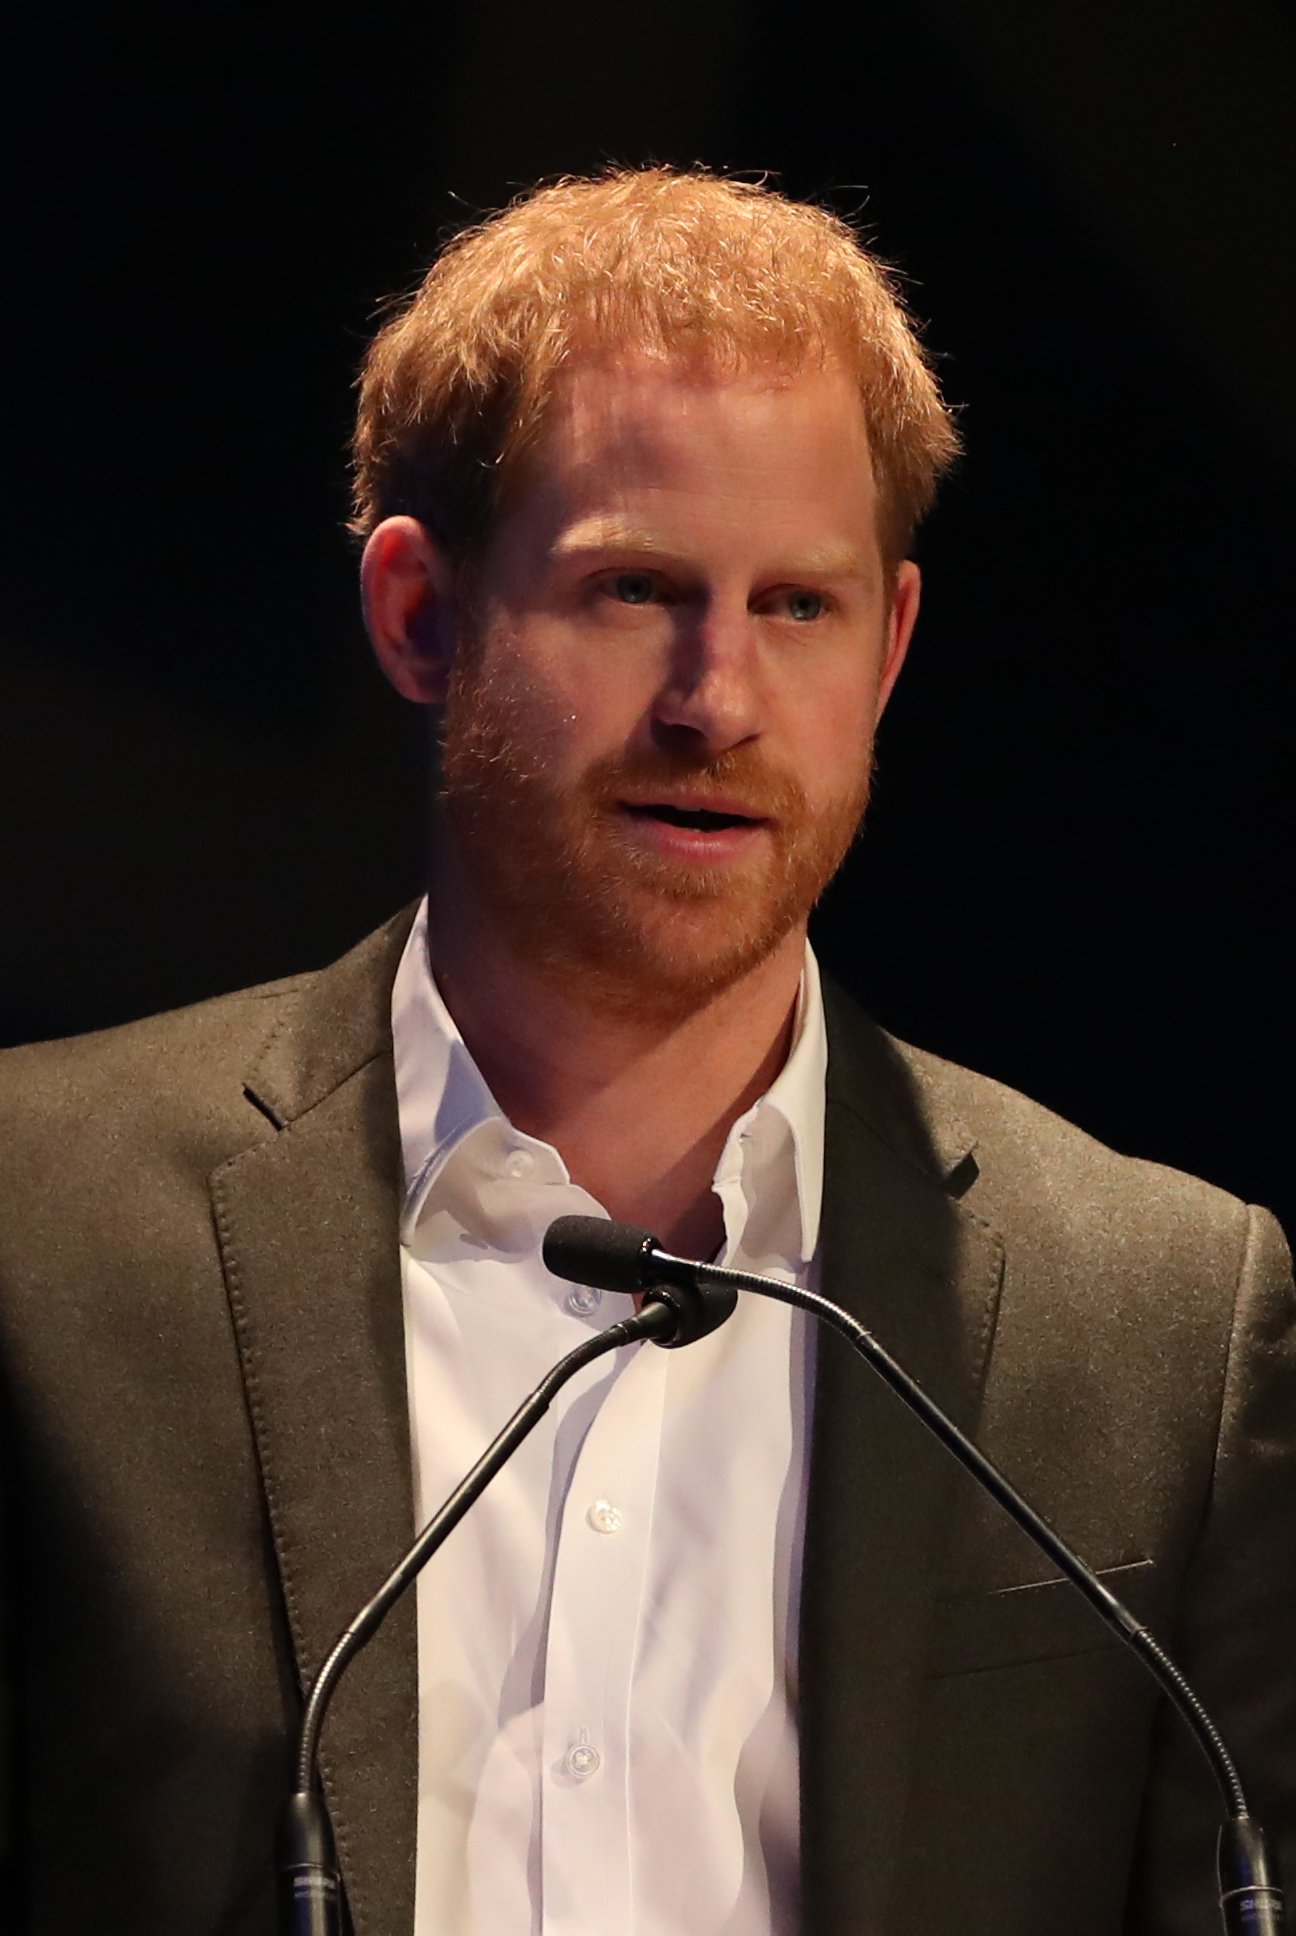 Prince Harry, Duke of Sussex speaks as he attends a sustainable tourism summit at the Edinburgh International Conference Centre on February 26, 2020 in Edinburgh, Scotland. | Source: Getty Images